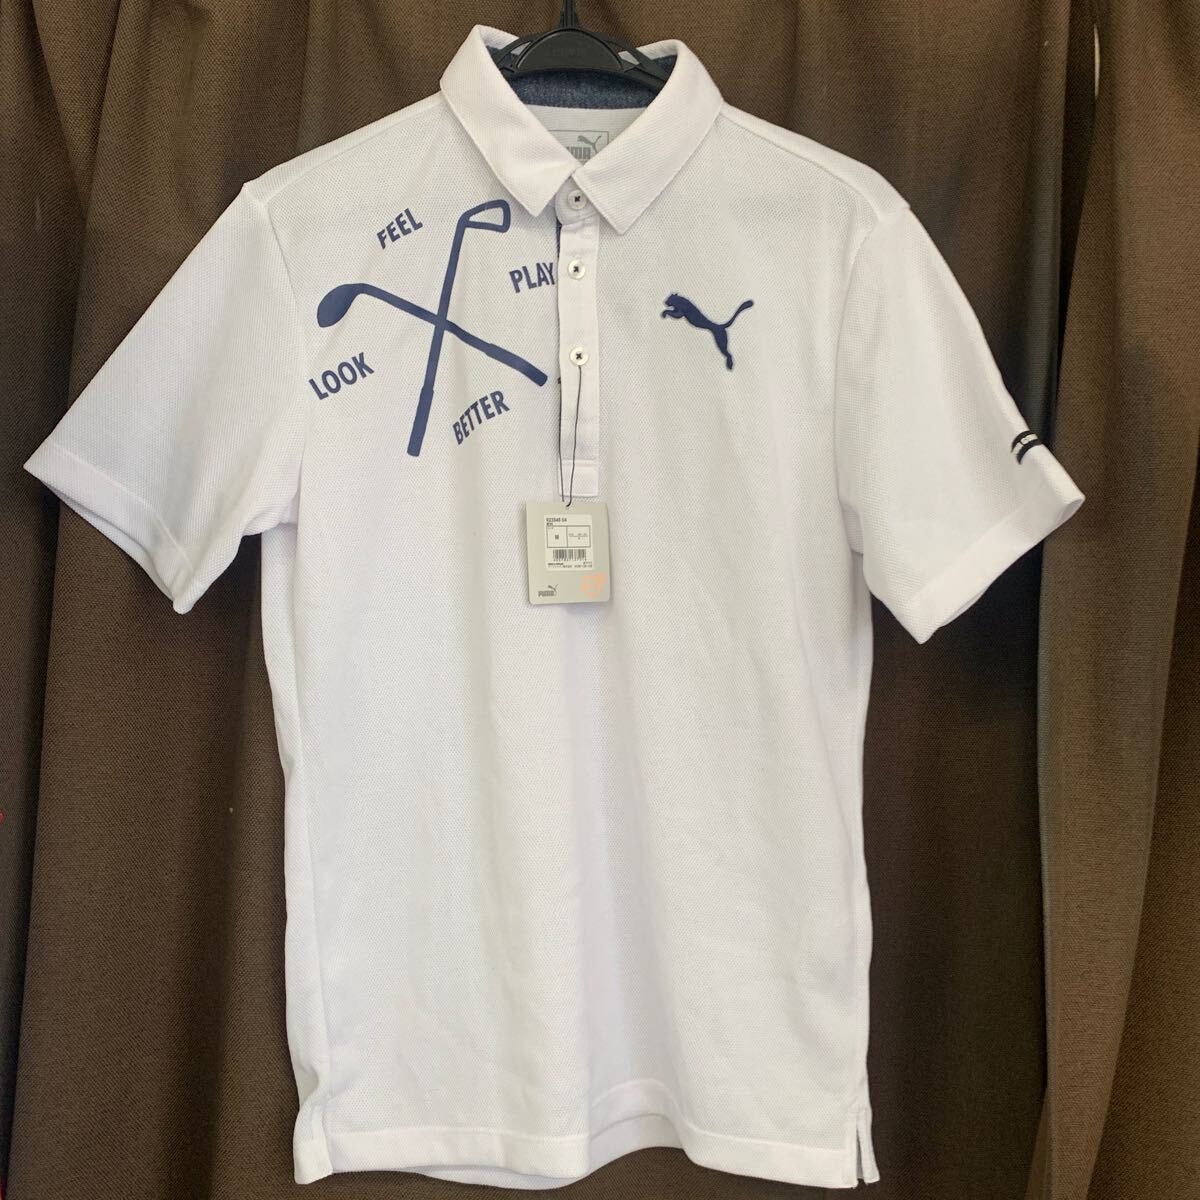  polo-shirt short sleeves polo-shirt with short sleeves Puma PUMA PUMA Golf Golf GOLF Golf wear men's MENS M size 